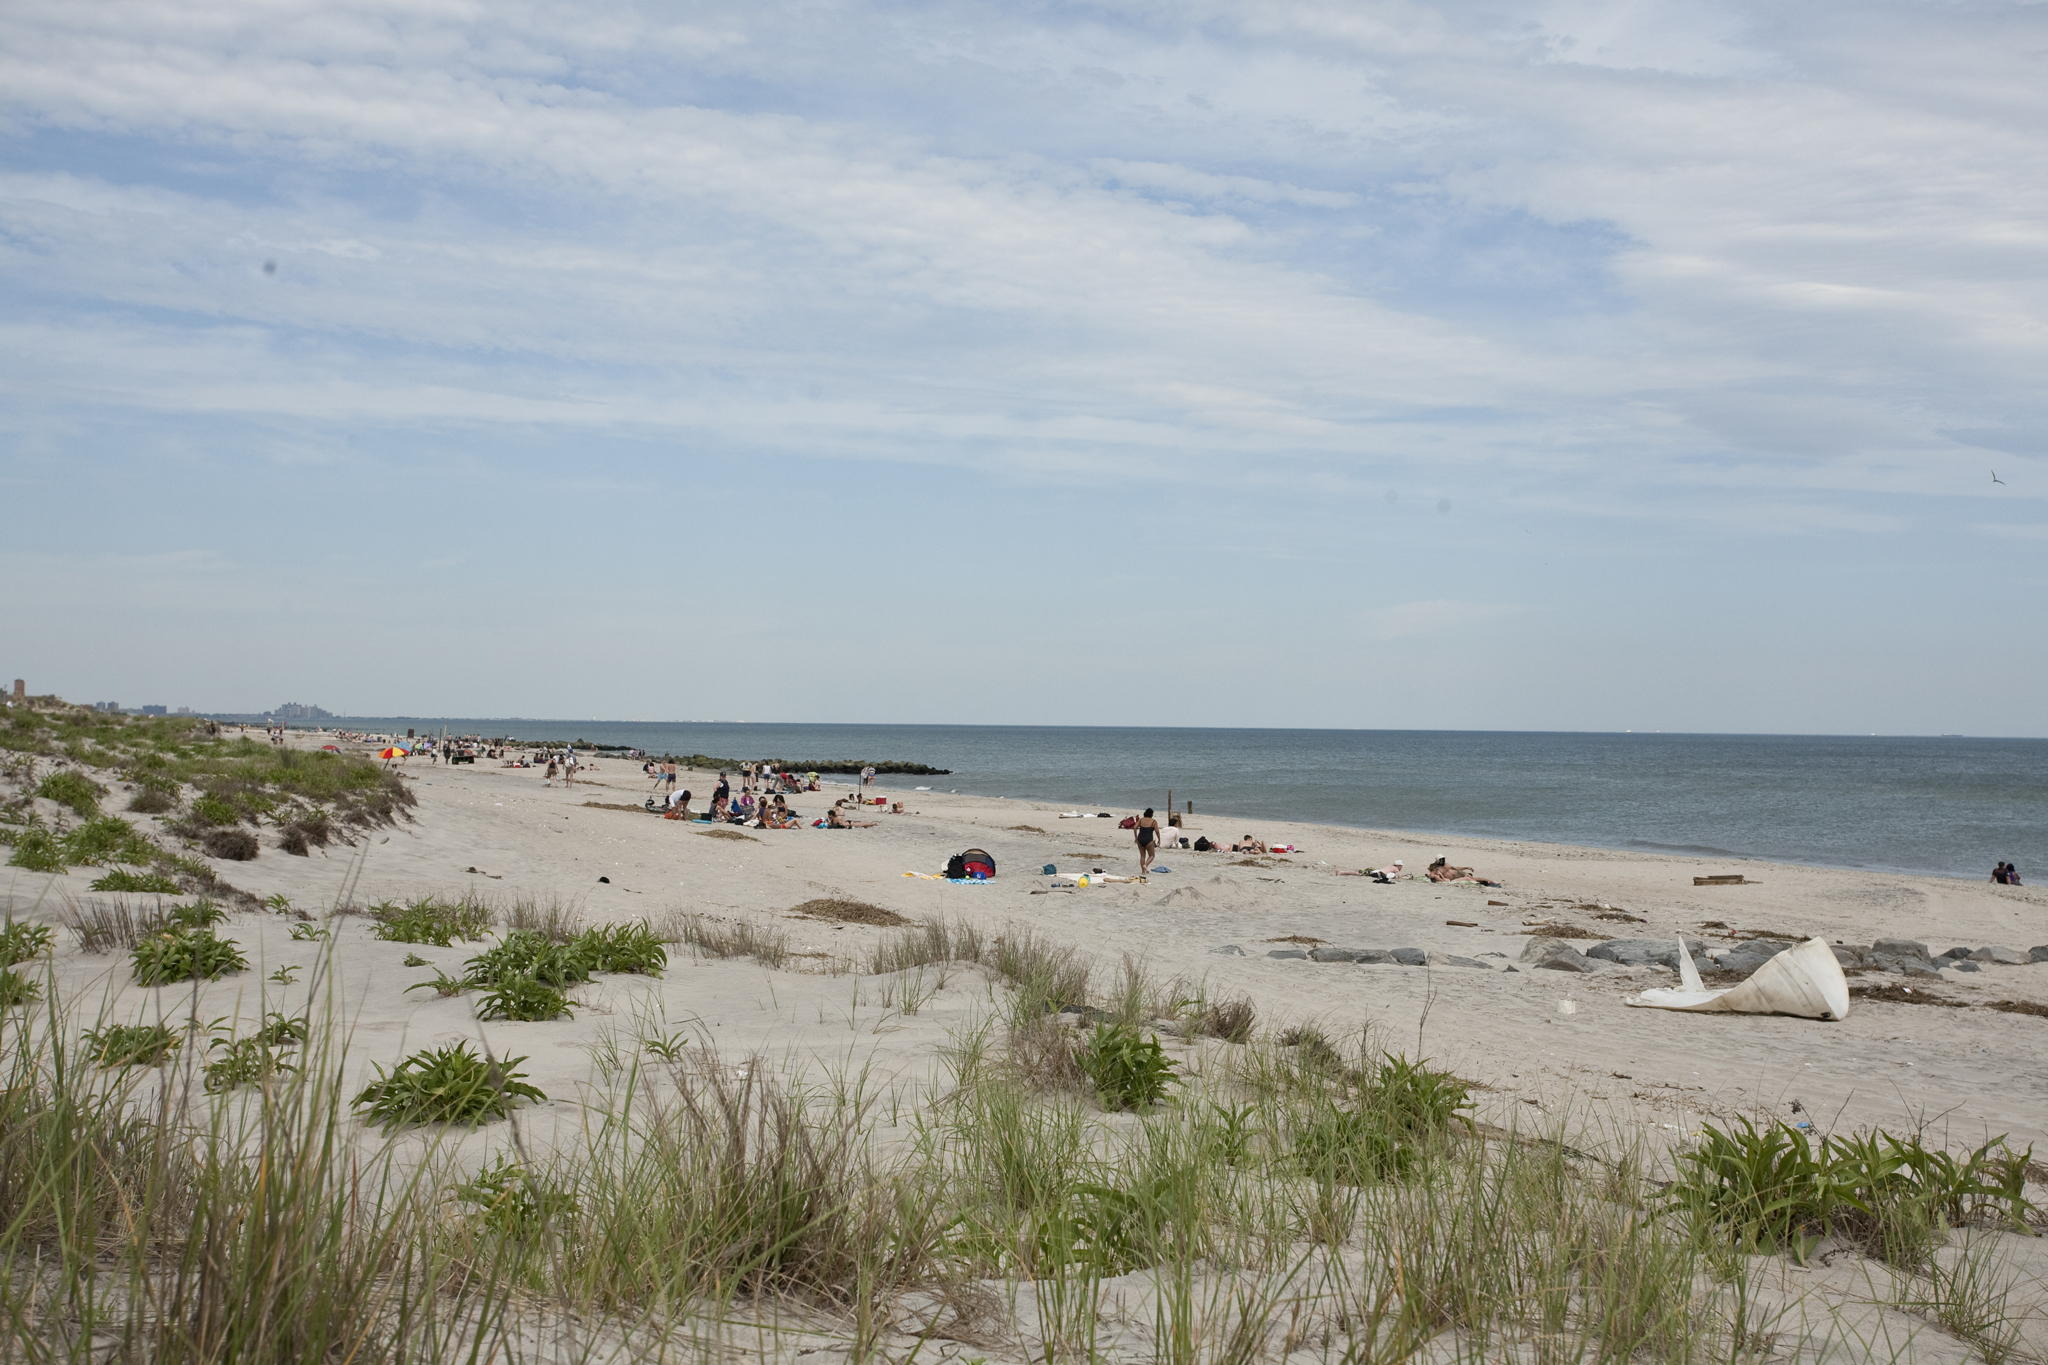 Best Beaches NYC Has Nearby From Coney Island to Rockaway